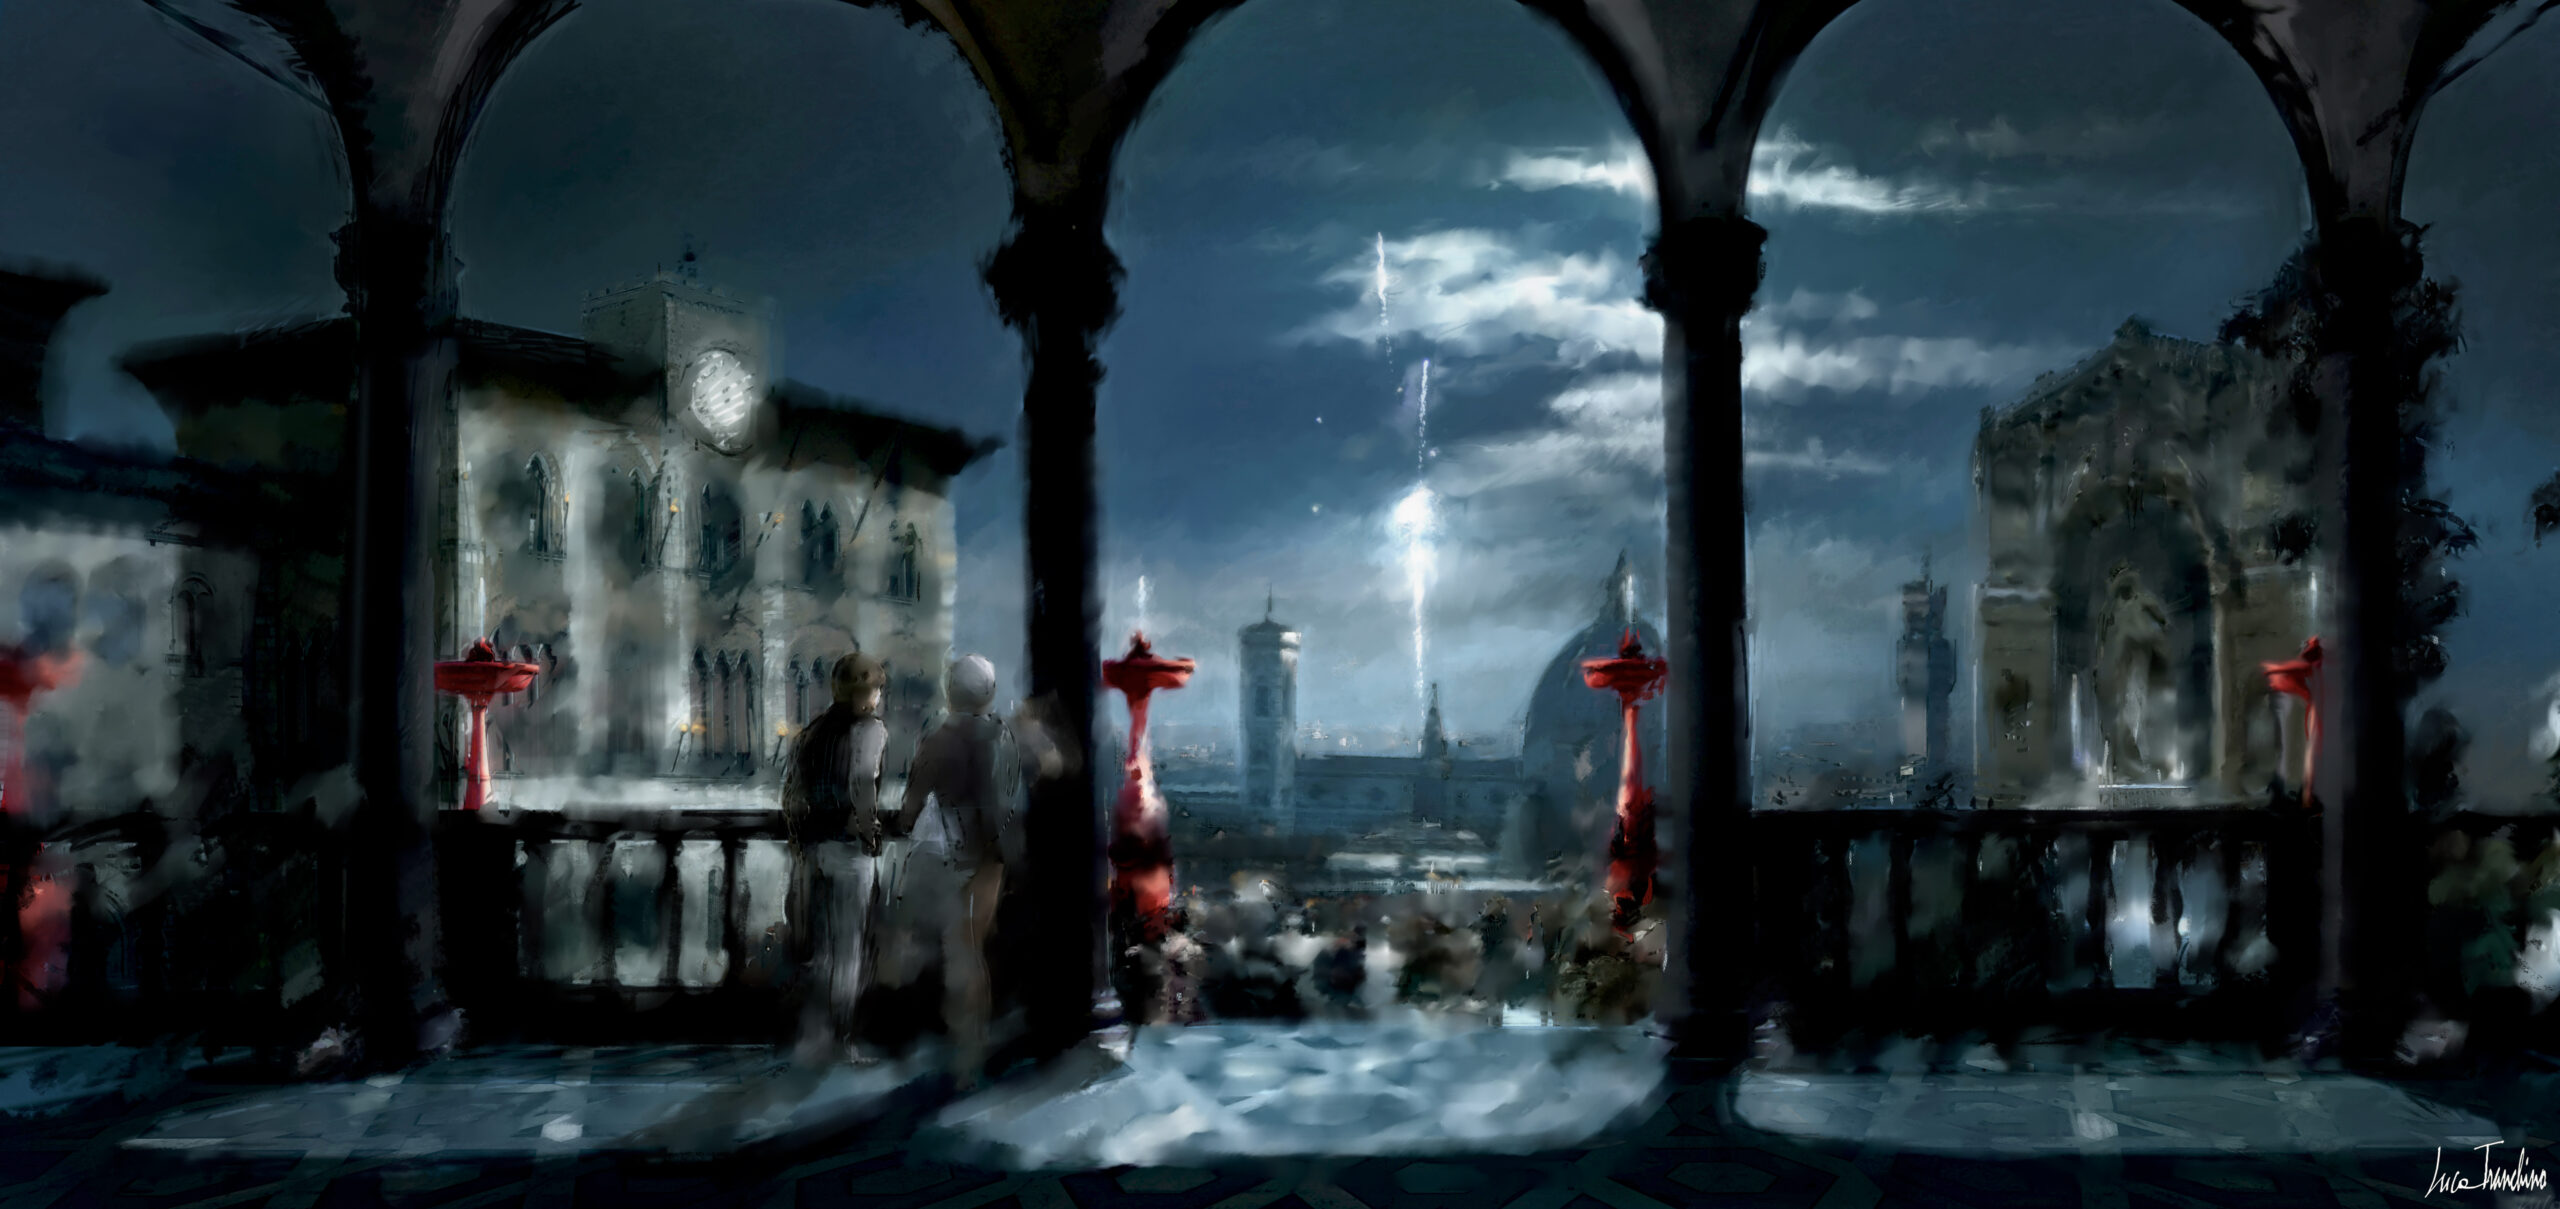 “Ext. Florence 1400” Concept Art by Luca Tranchino - ©2009 - Mixed Media